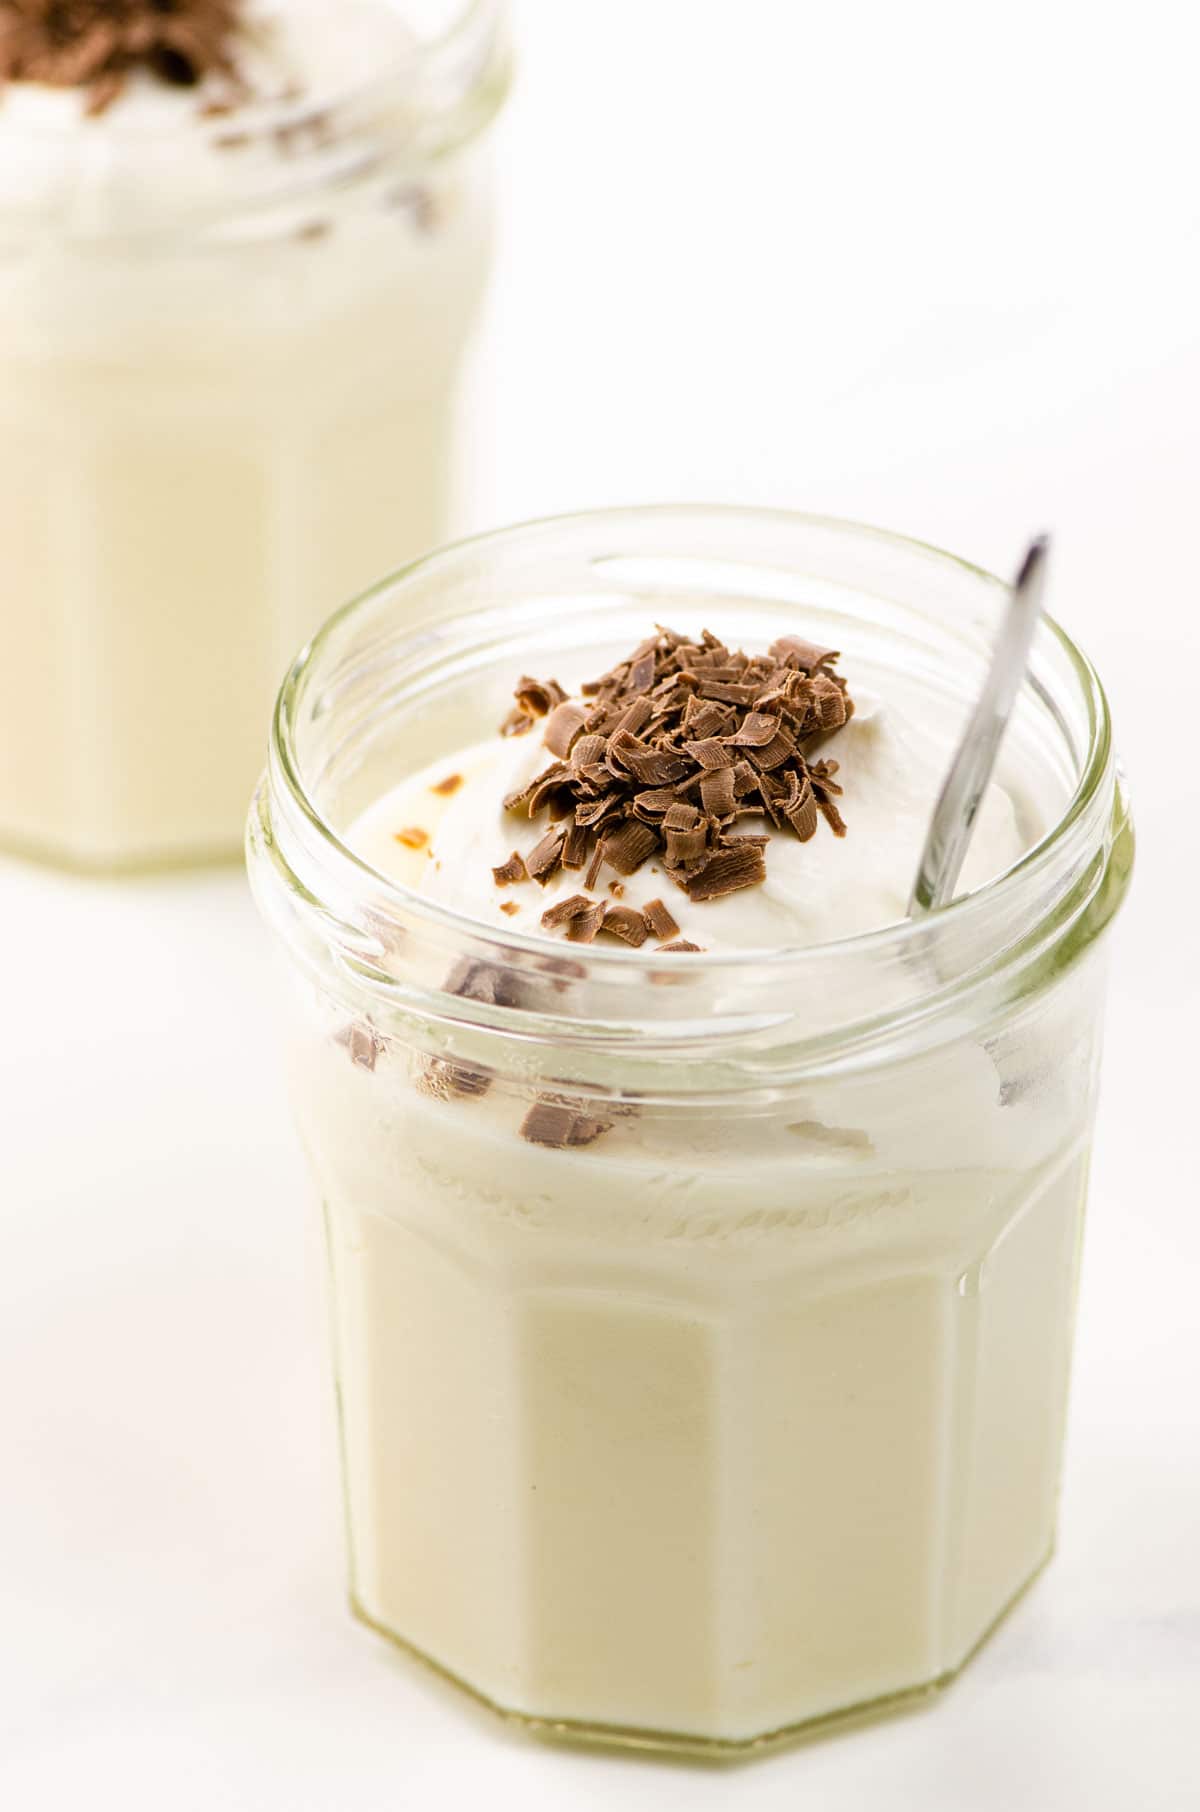 classic vanilla pudding with whipped cream and chocolate shavings in two jam jars with spoons